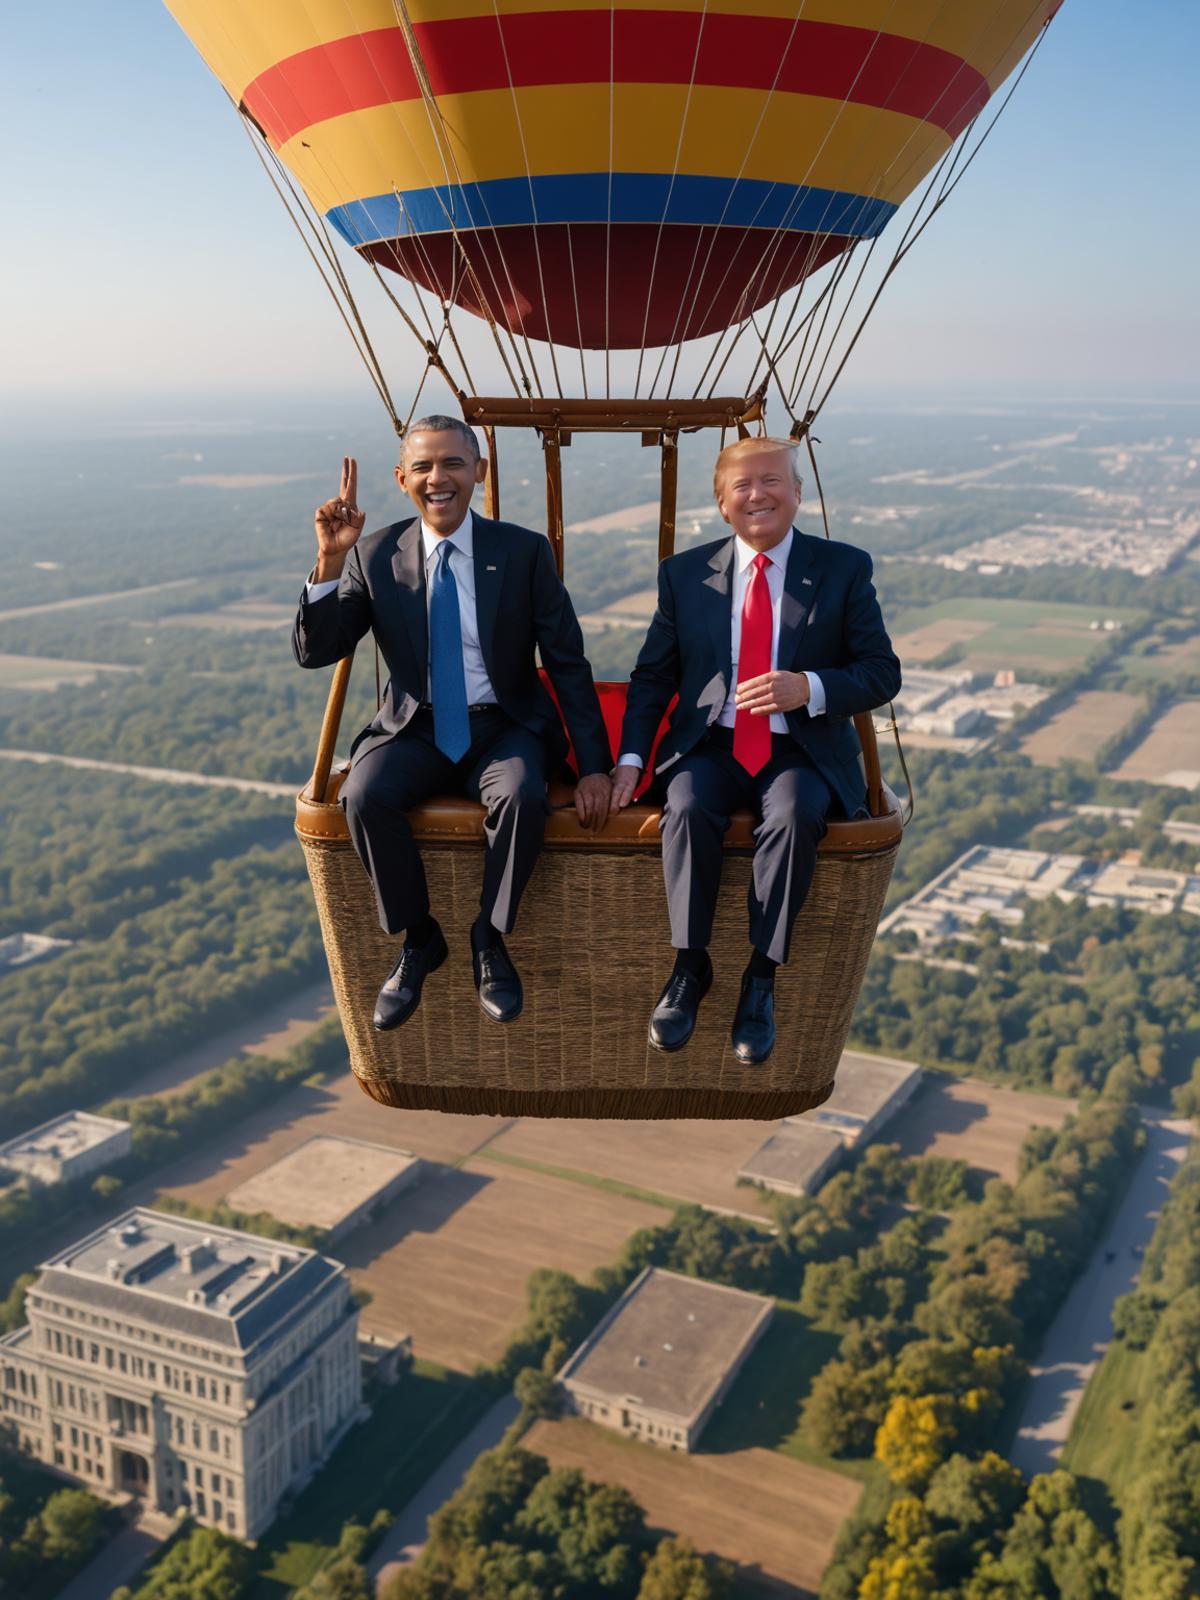 Two Presidents Ride a Hot Air Balloon Together